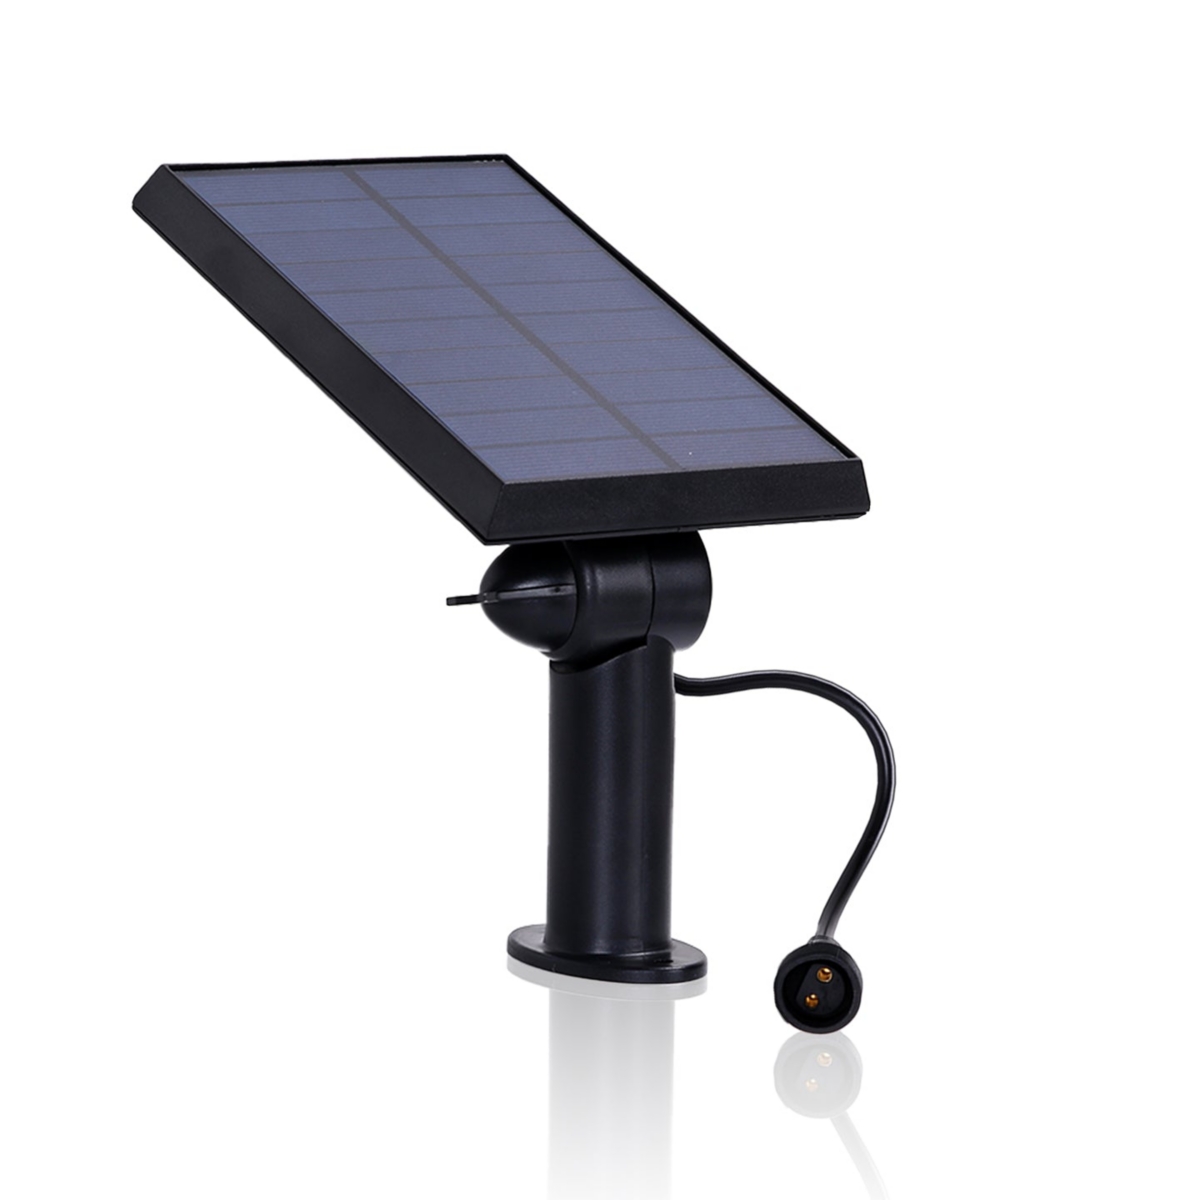 Solar Panel fitted for Brightech's Remote Controlled Solar String Lights Only - Black